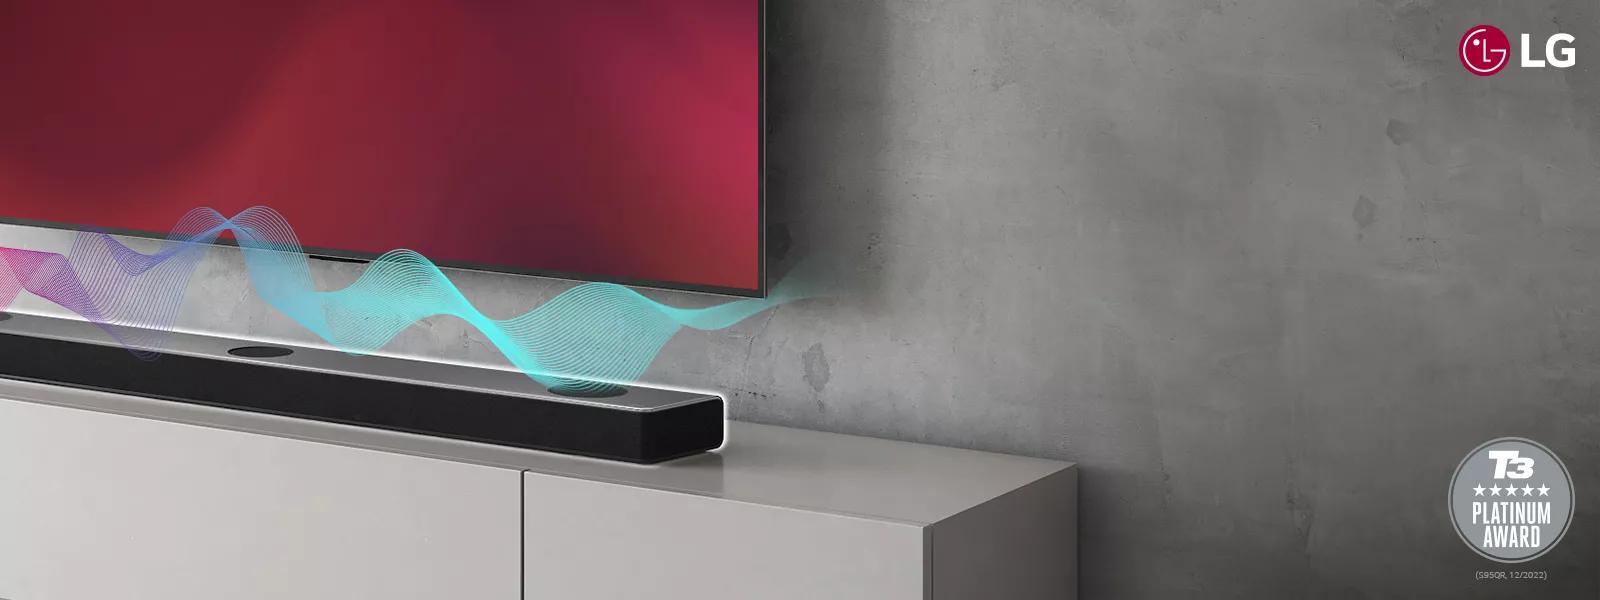 LG Sound Bar paired with an LG TV